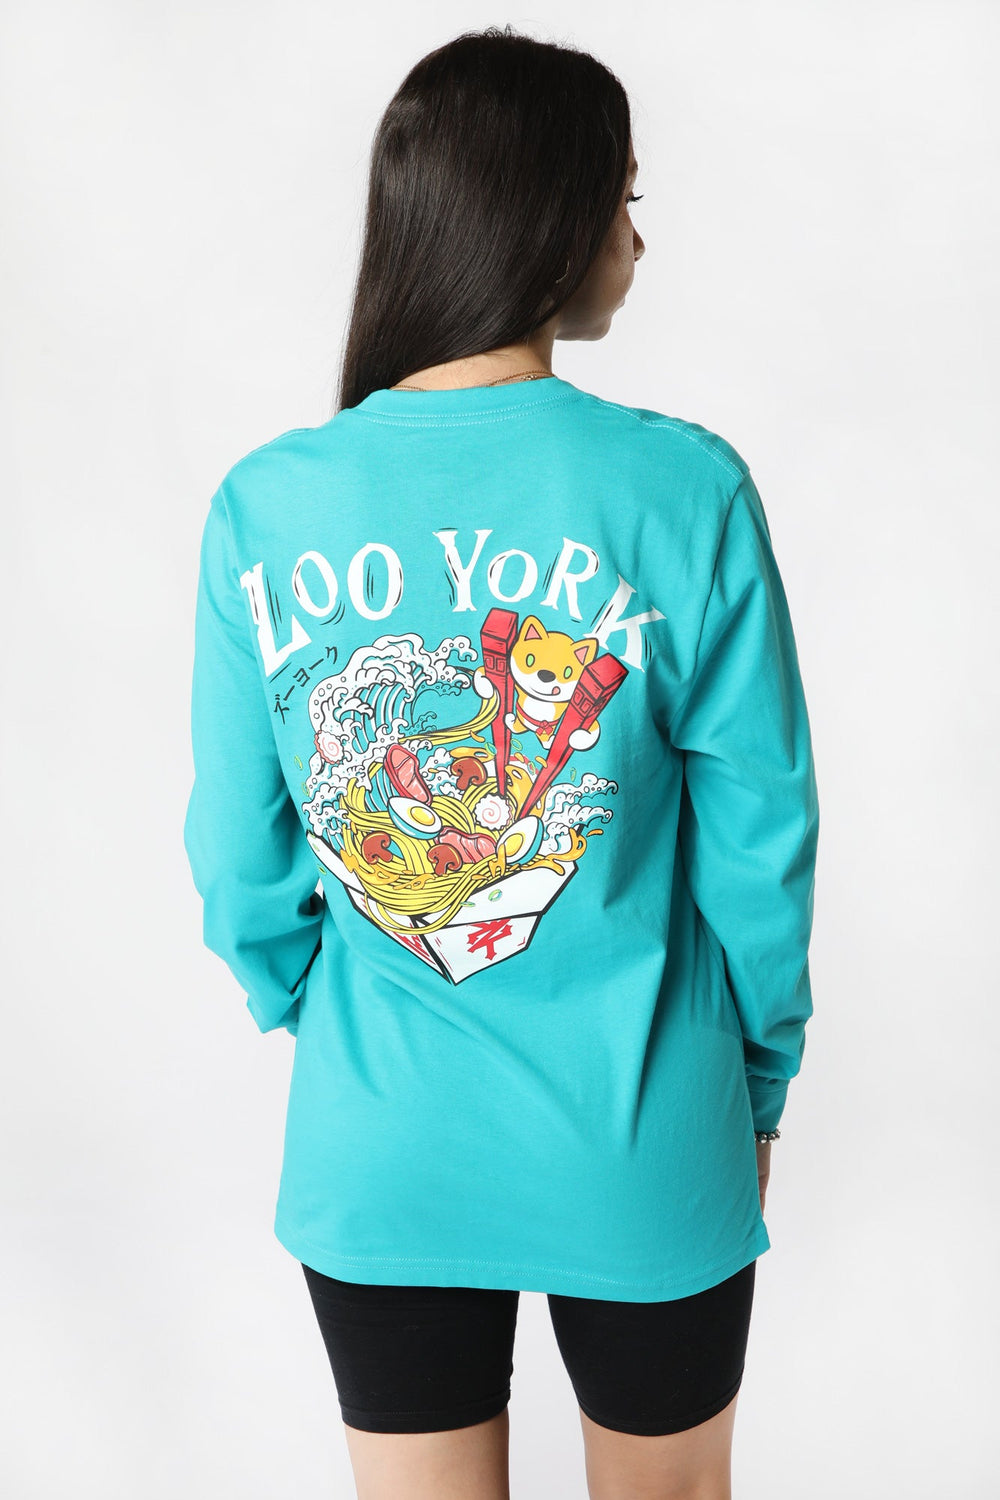 Zoo York Unisex Takeout Noodles Long Sleeve Top Zoo York Unisex Takeout Noodles Long Sleeve Top